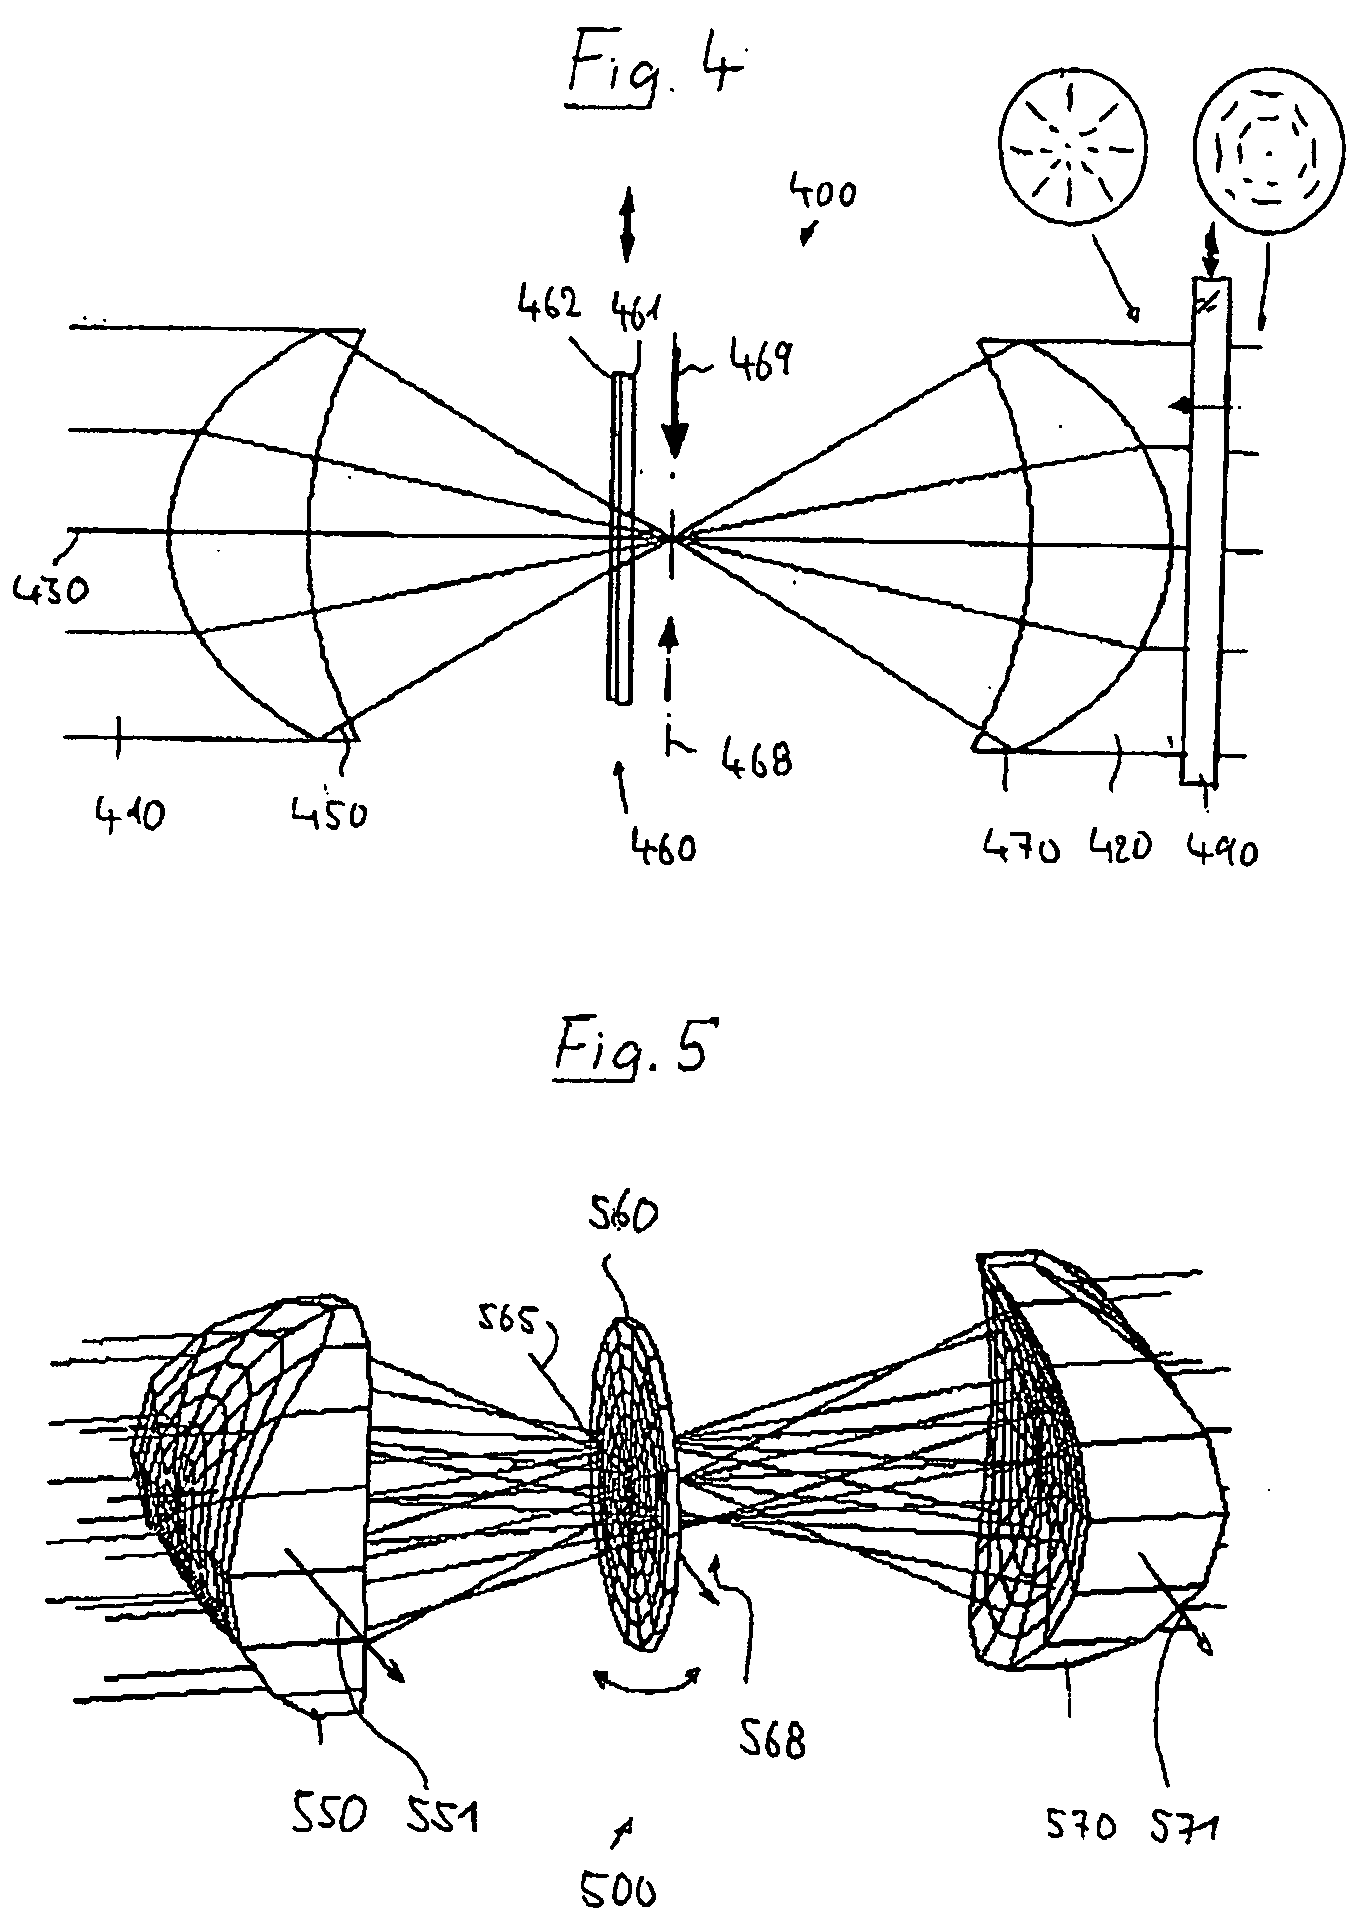 Polarizer device for generating a defined spatial distribution of polarization states